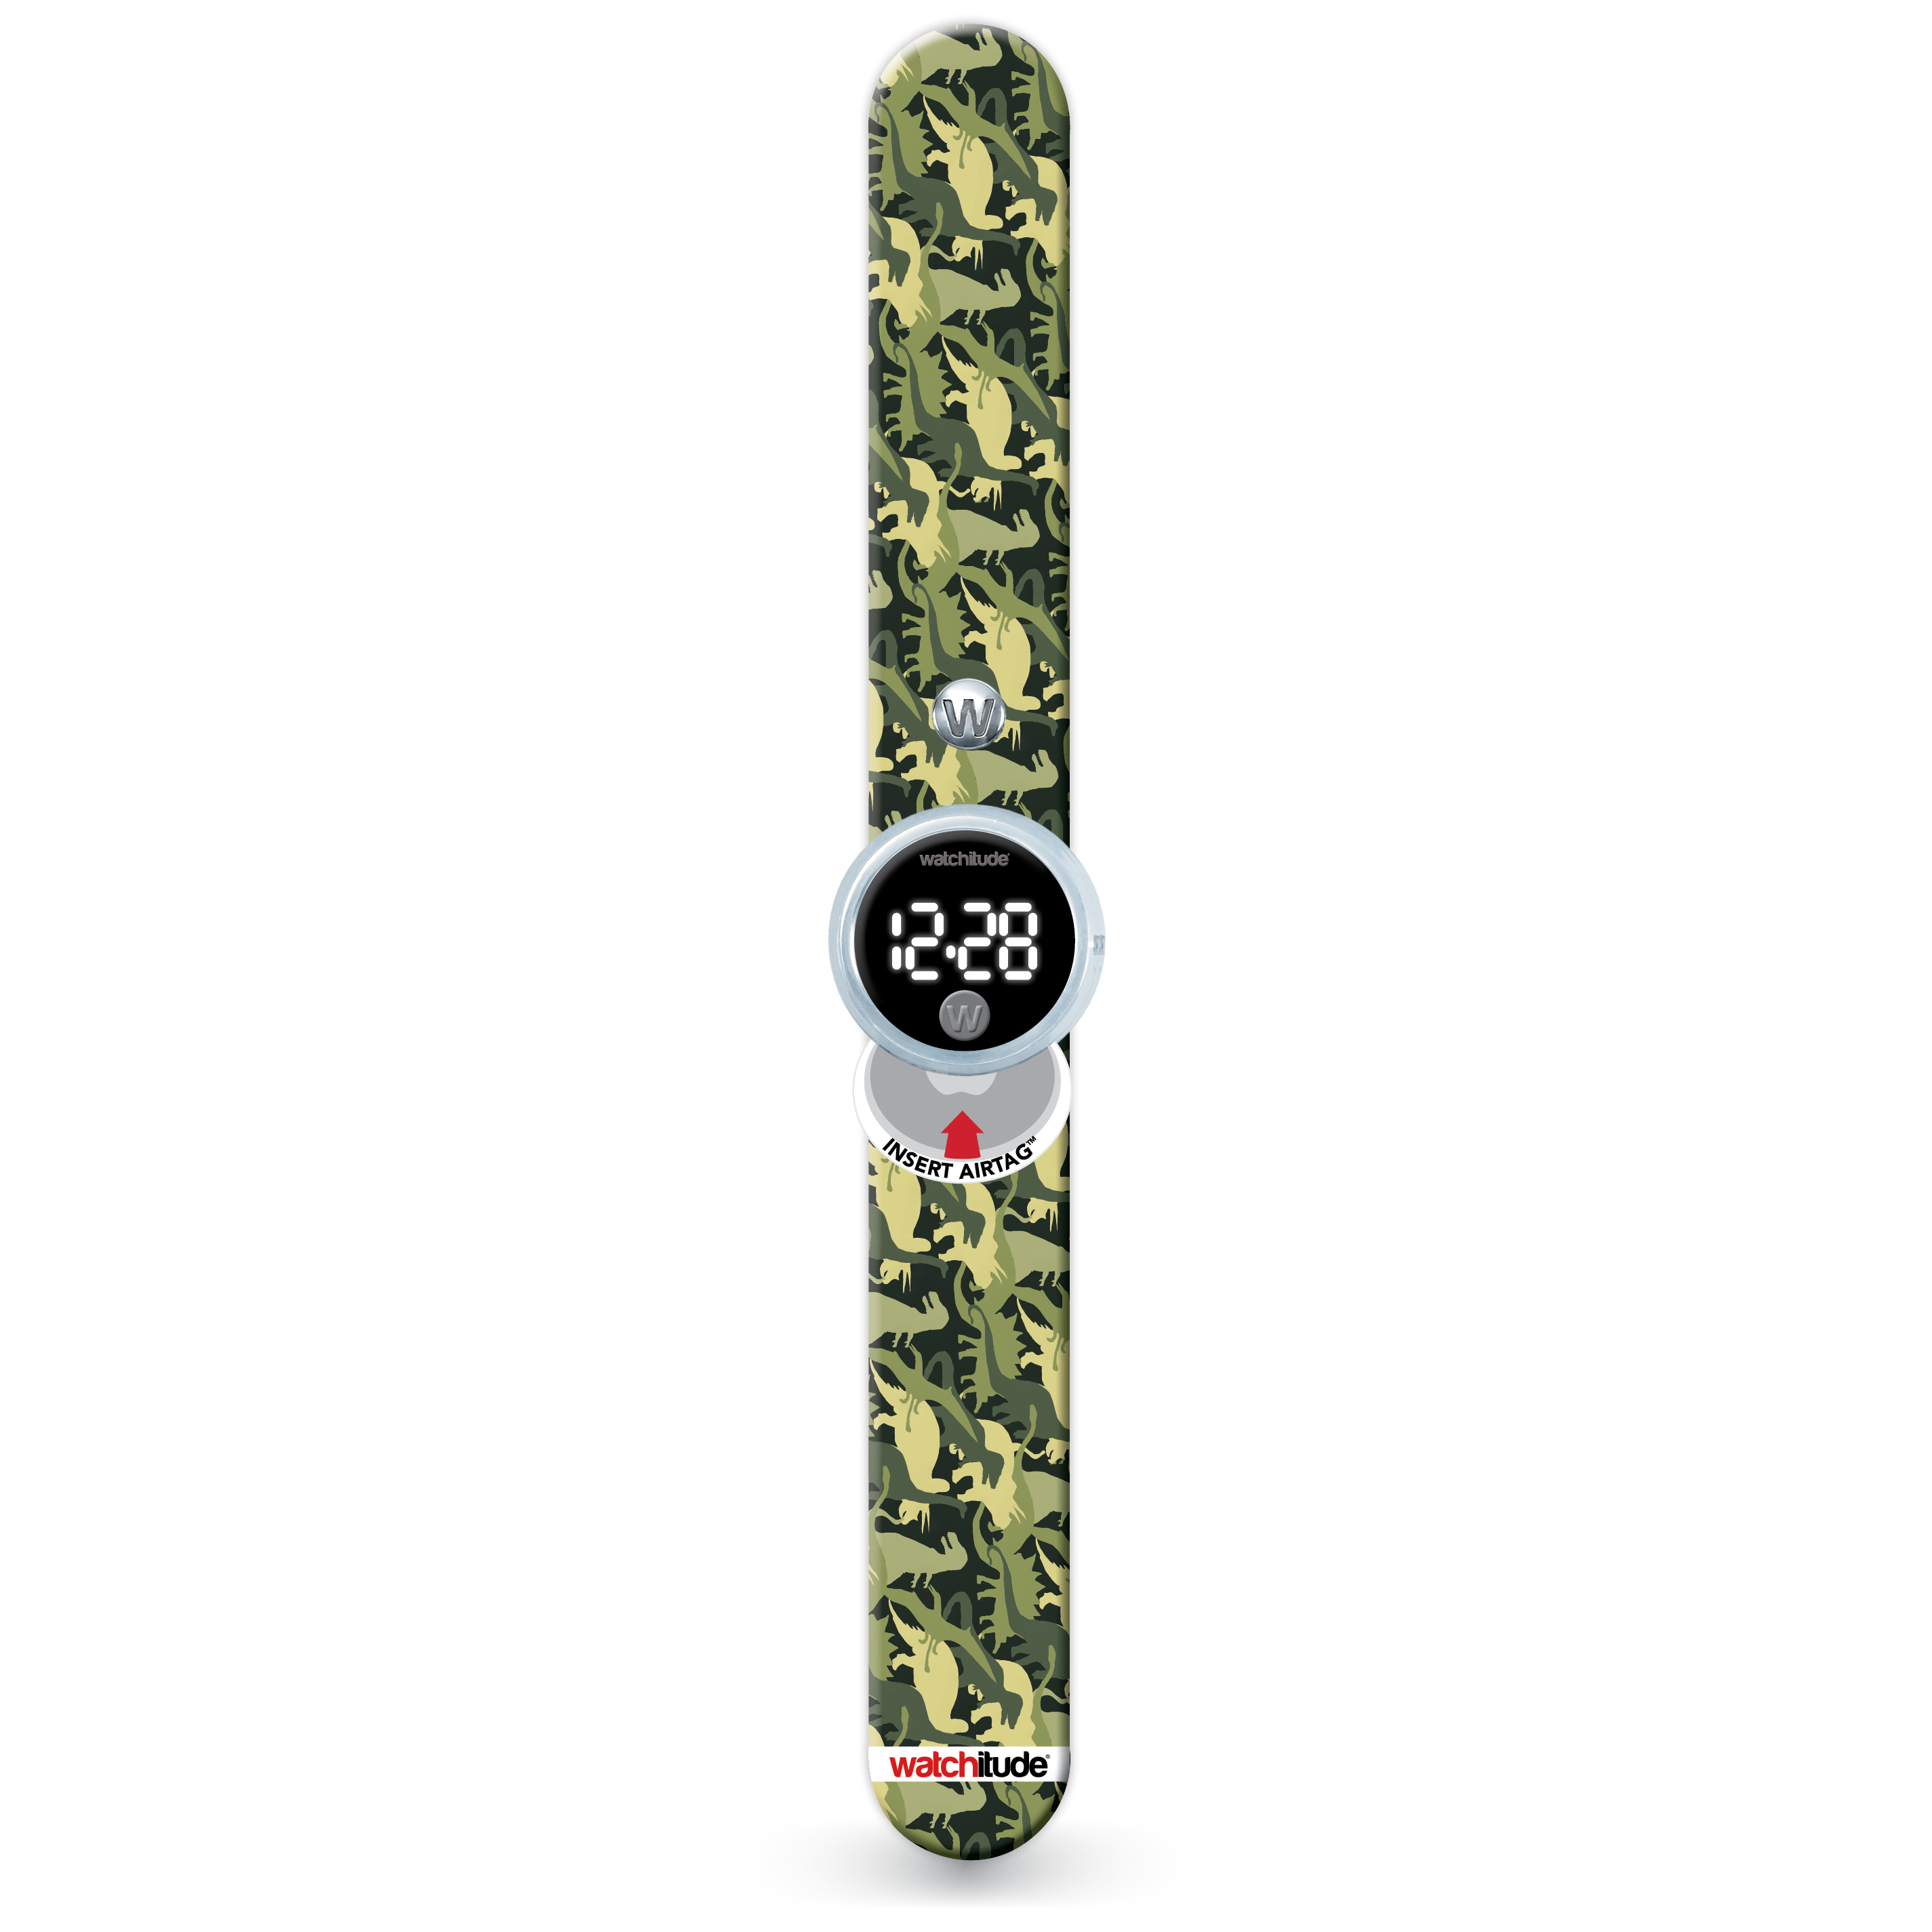 Tag’d Trackable Watch - Dino Camo